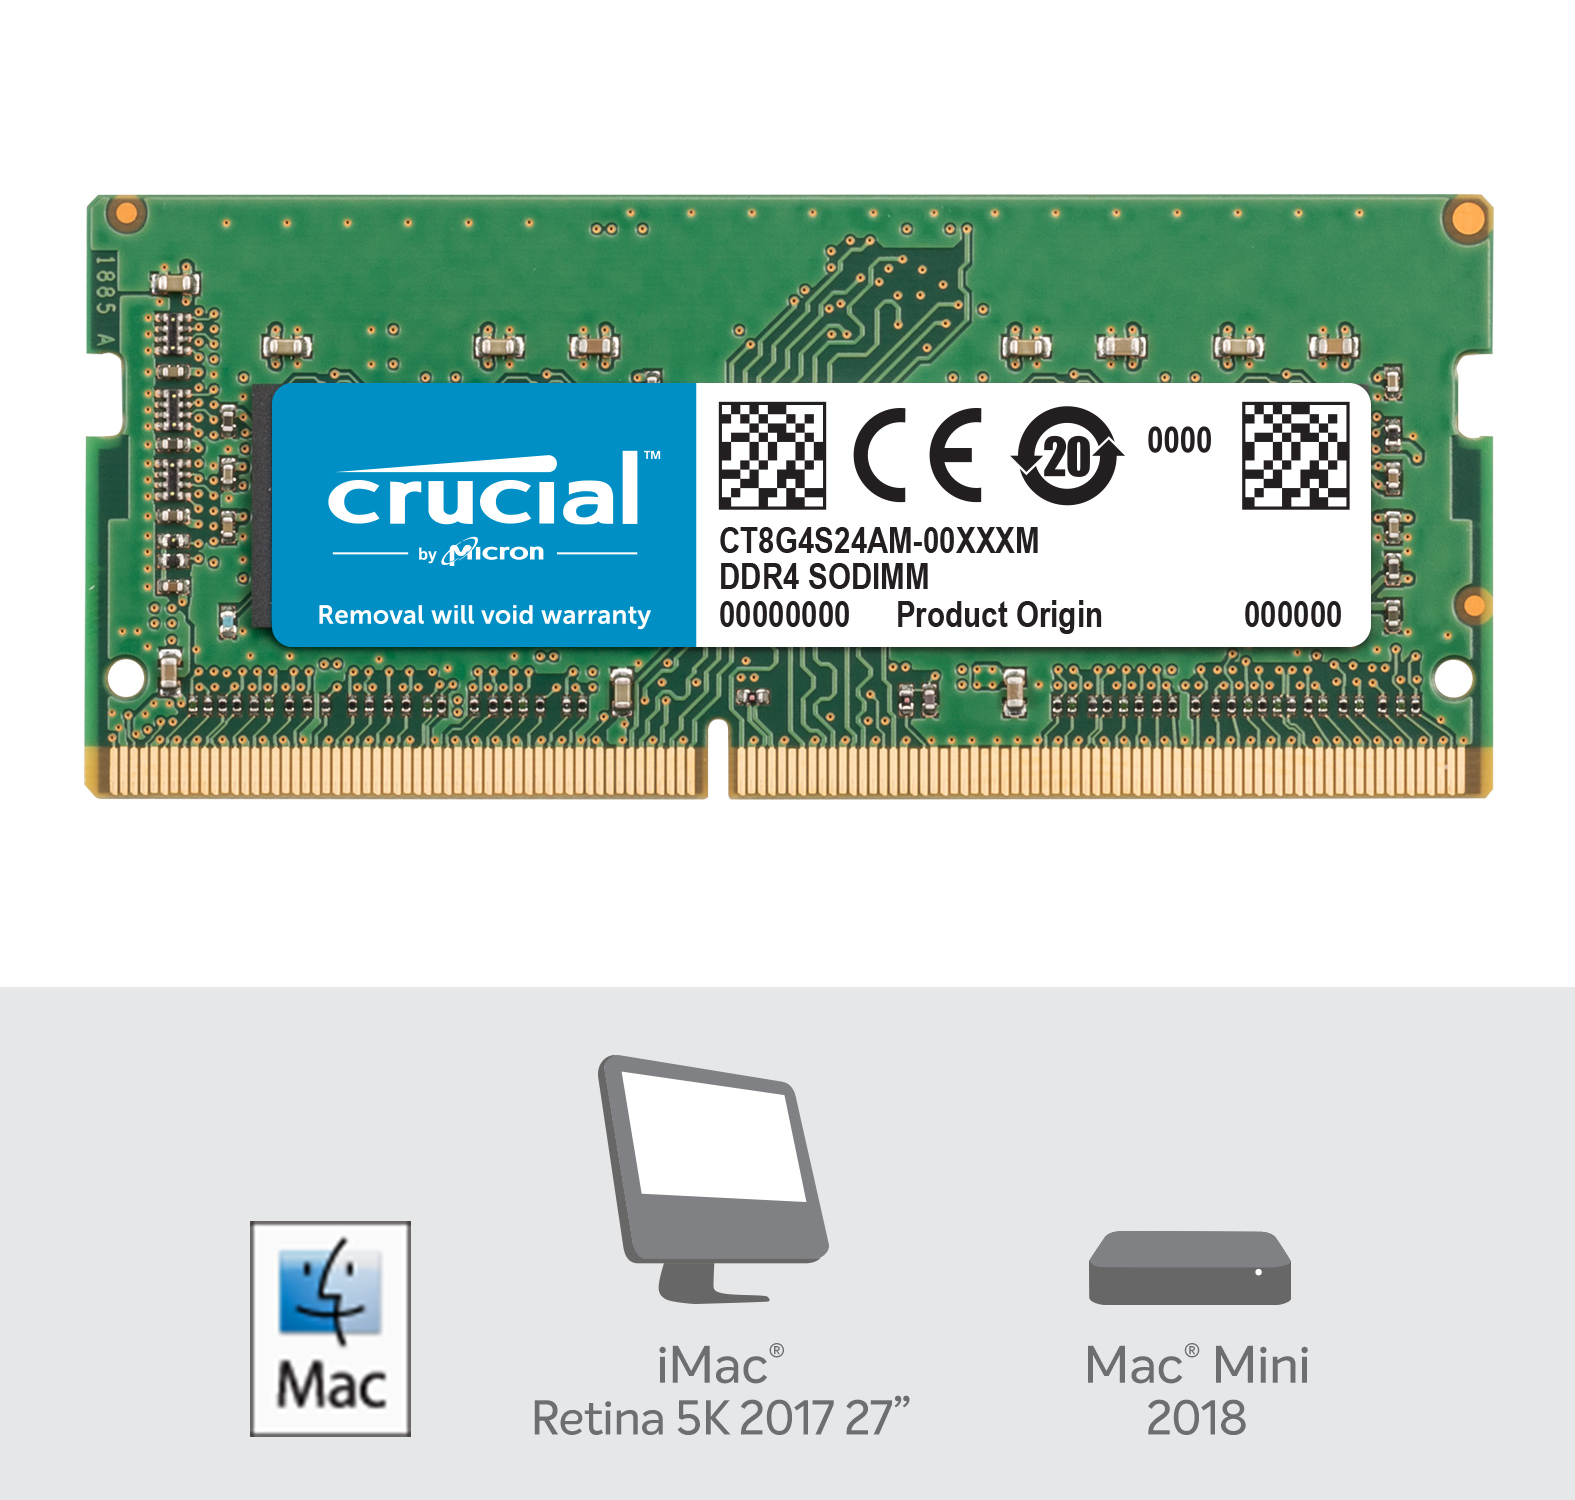 Crucial 8GB DDR4-2400 SODIMM Memory for Mac- view 2